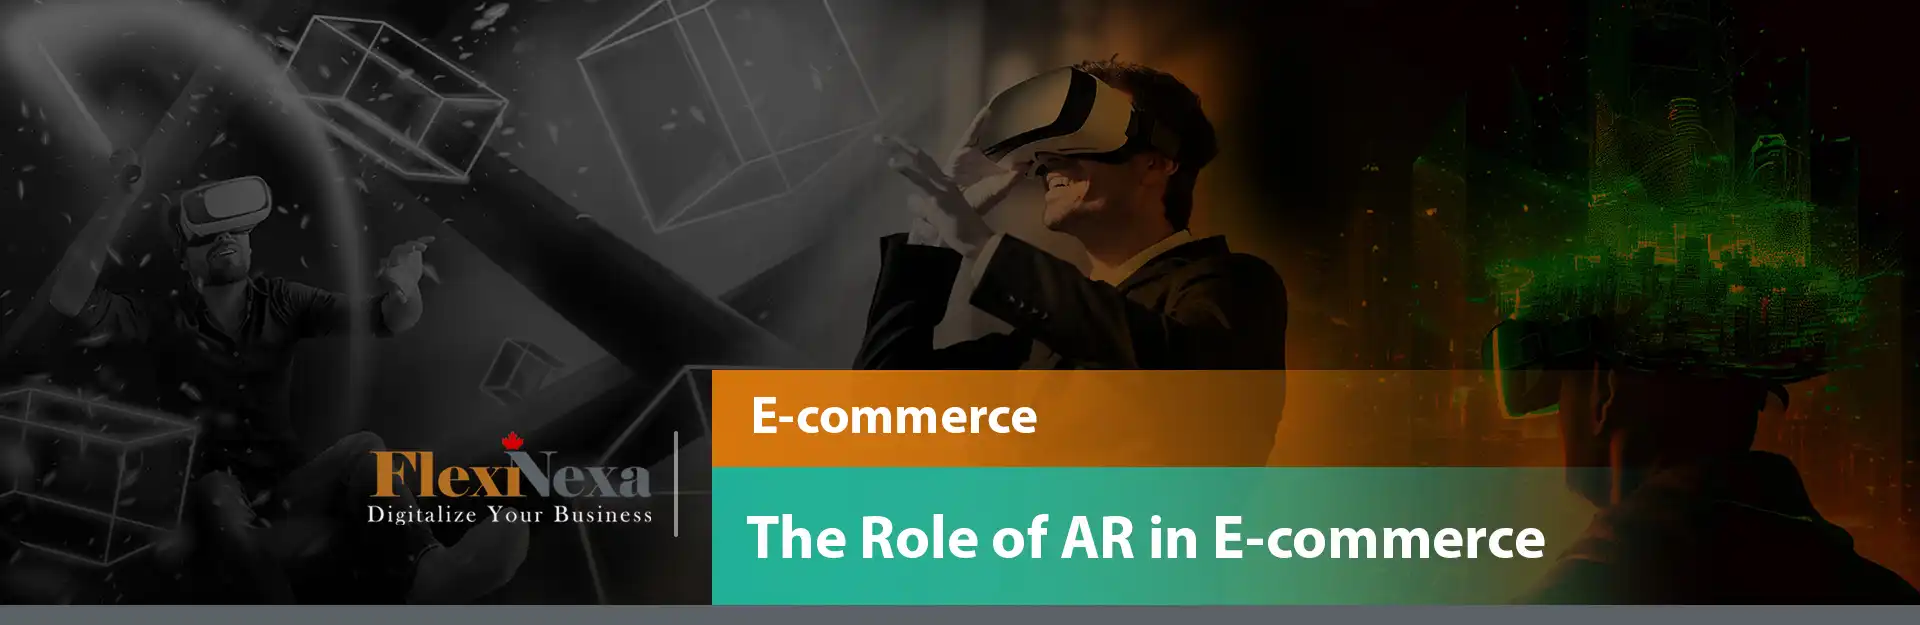 The Role of AR in E-commerce